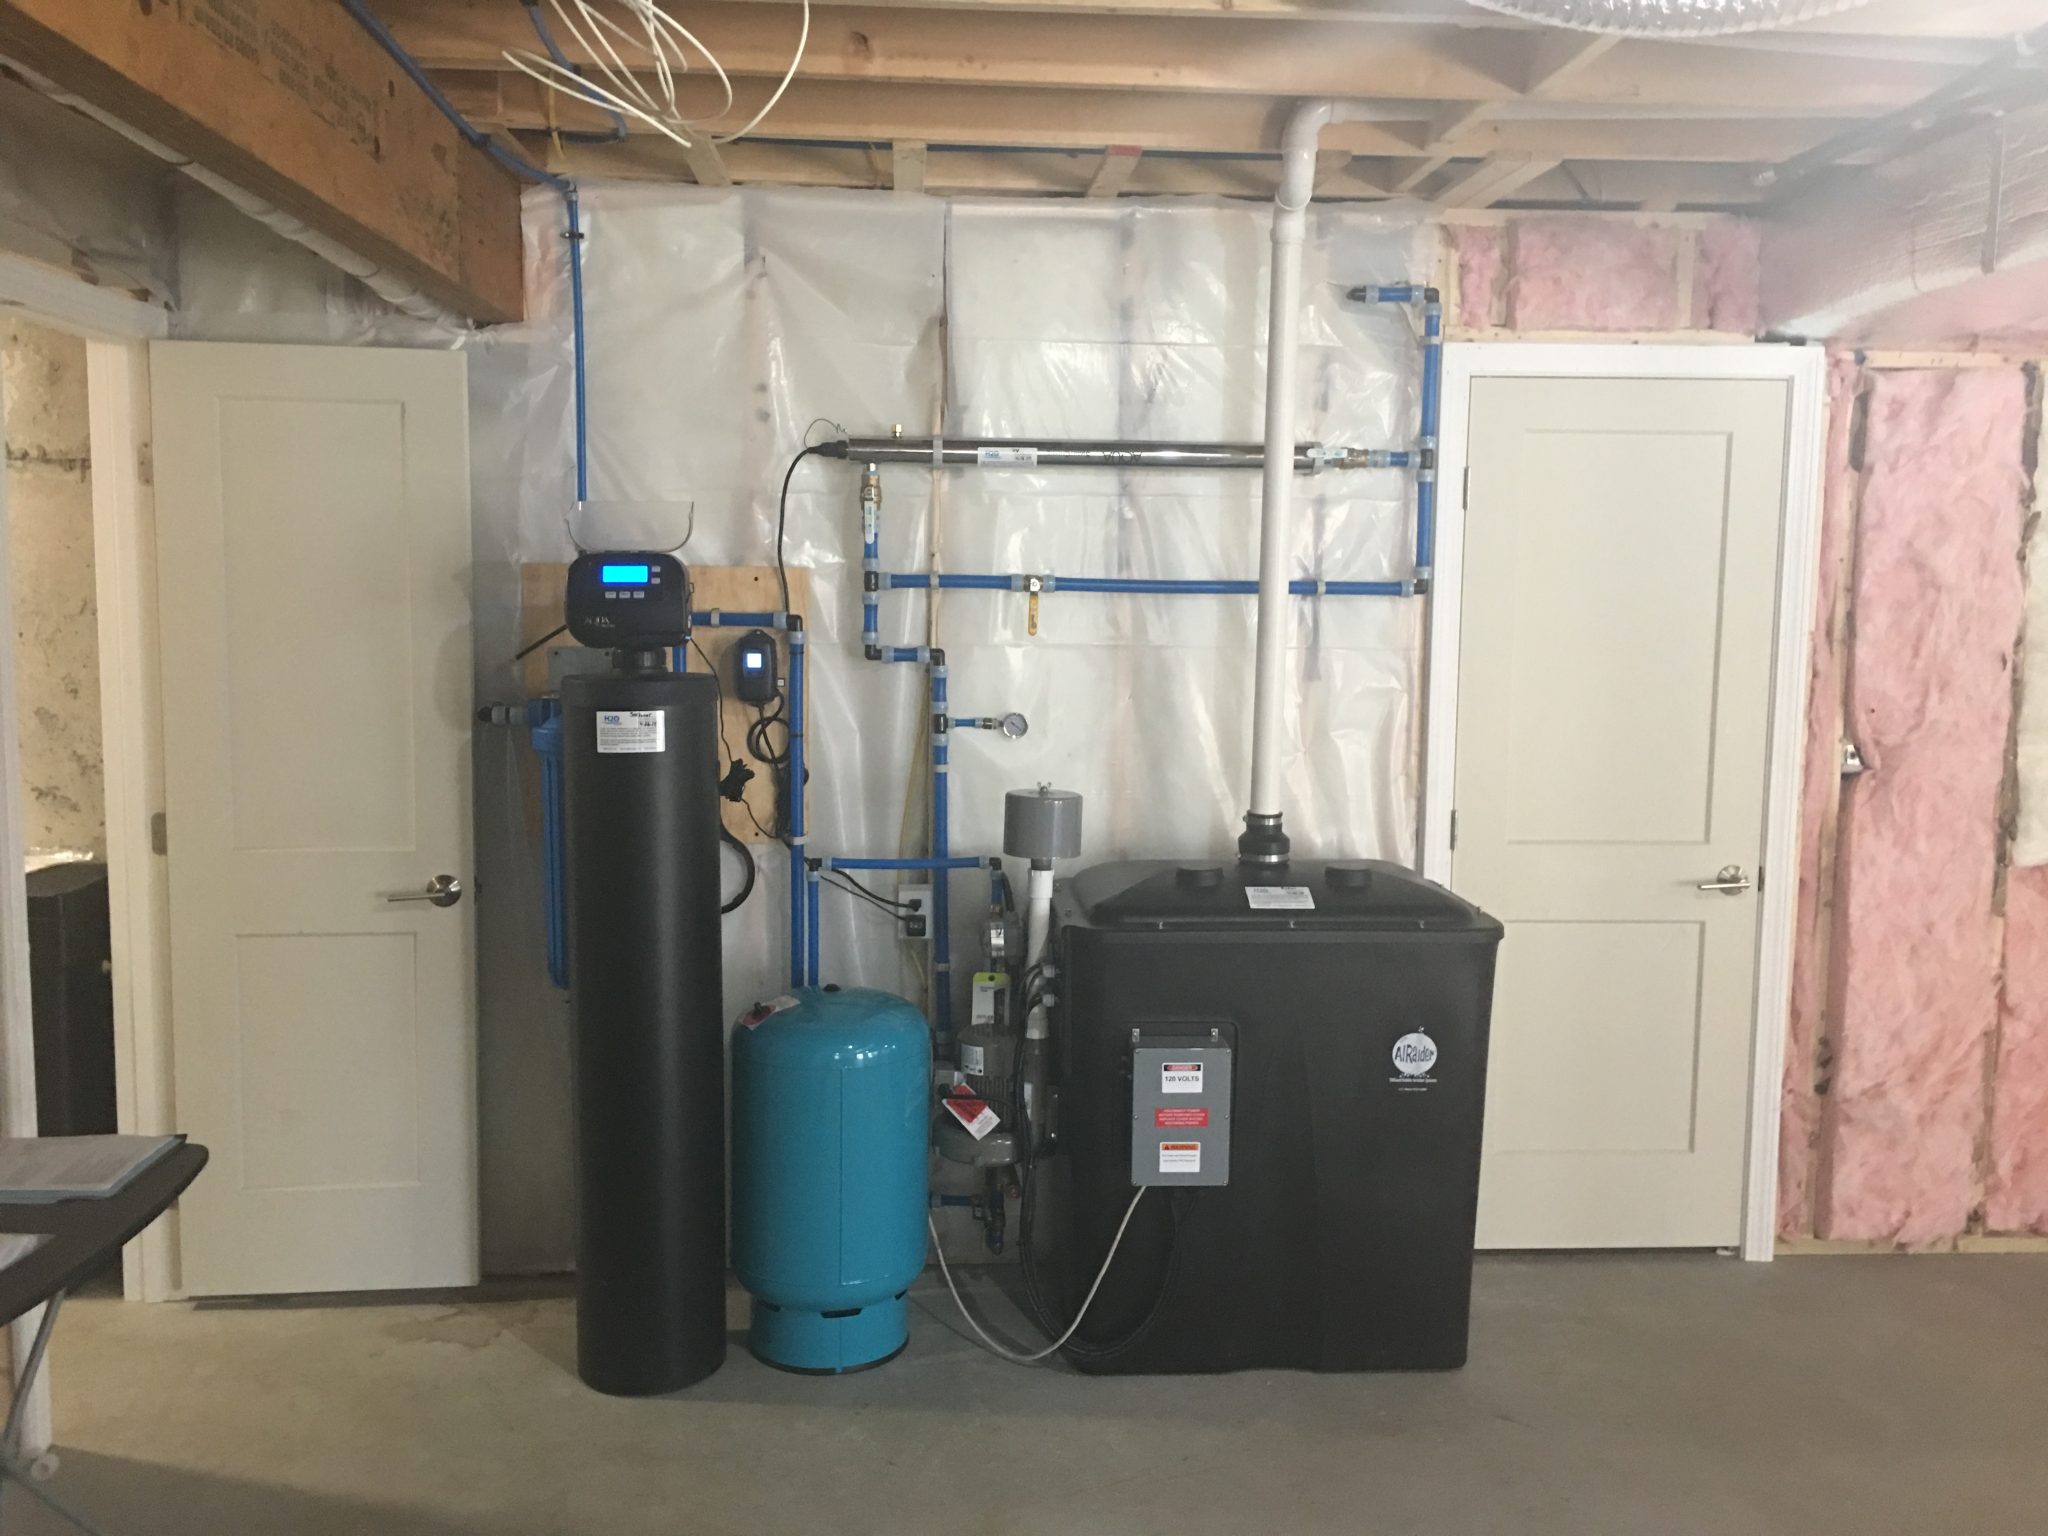 From right, Radon in water removal system with pressure tank (blue) and 1 1/2 cubic feet high efficiency Water Softener. 20" graded density sediment filter behind softener.